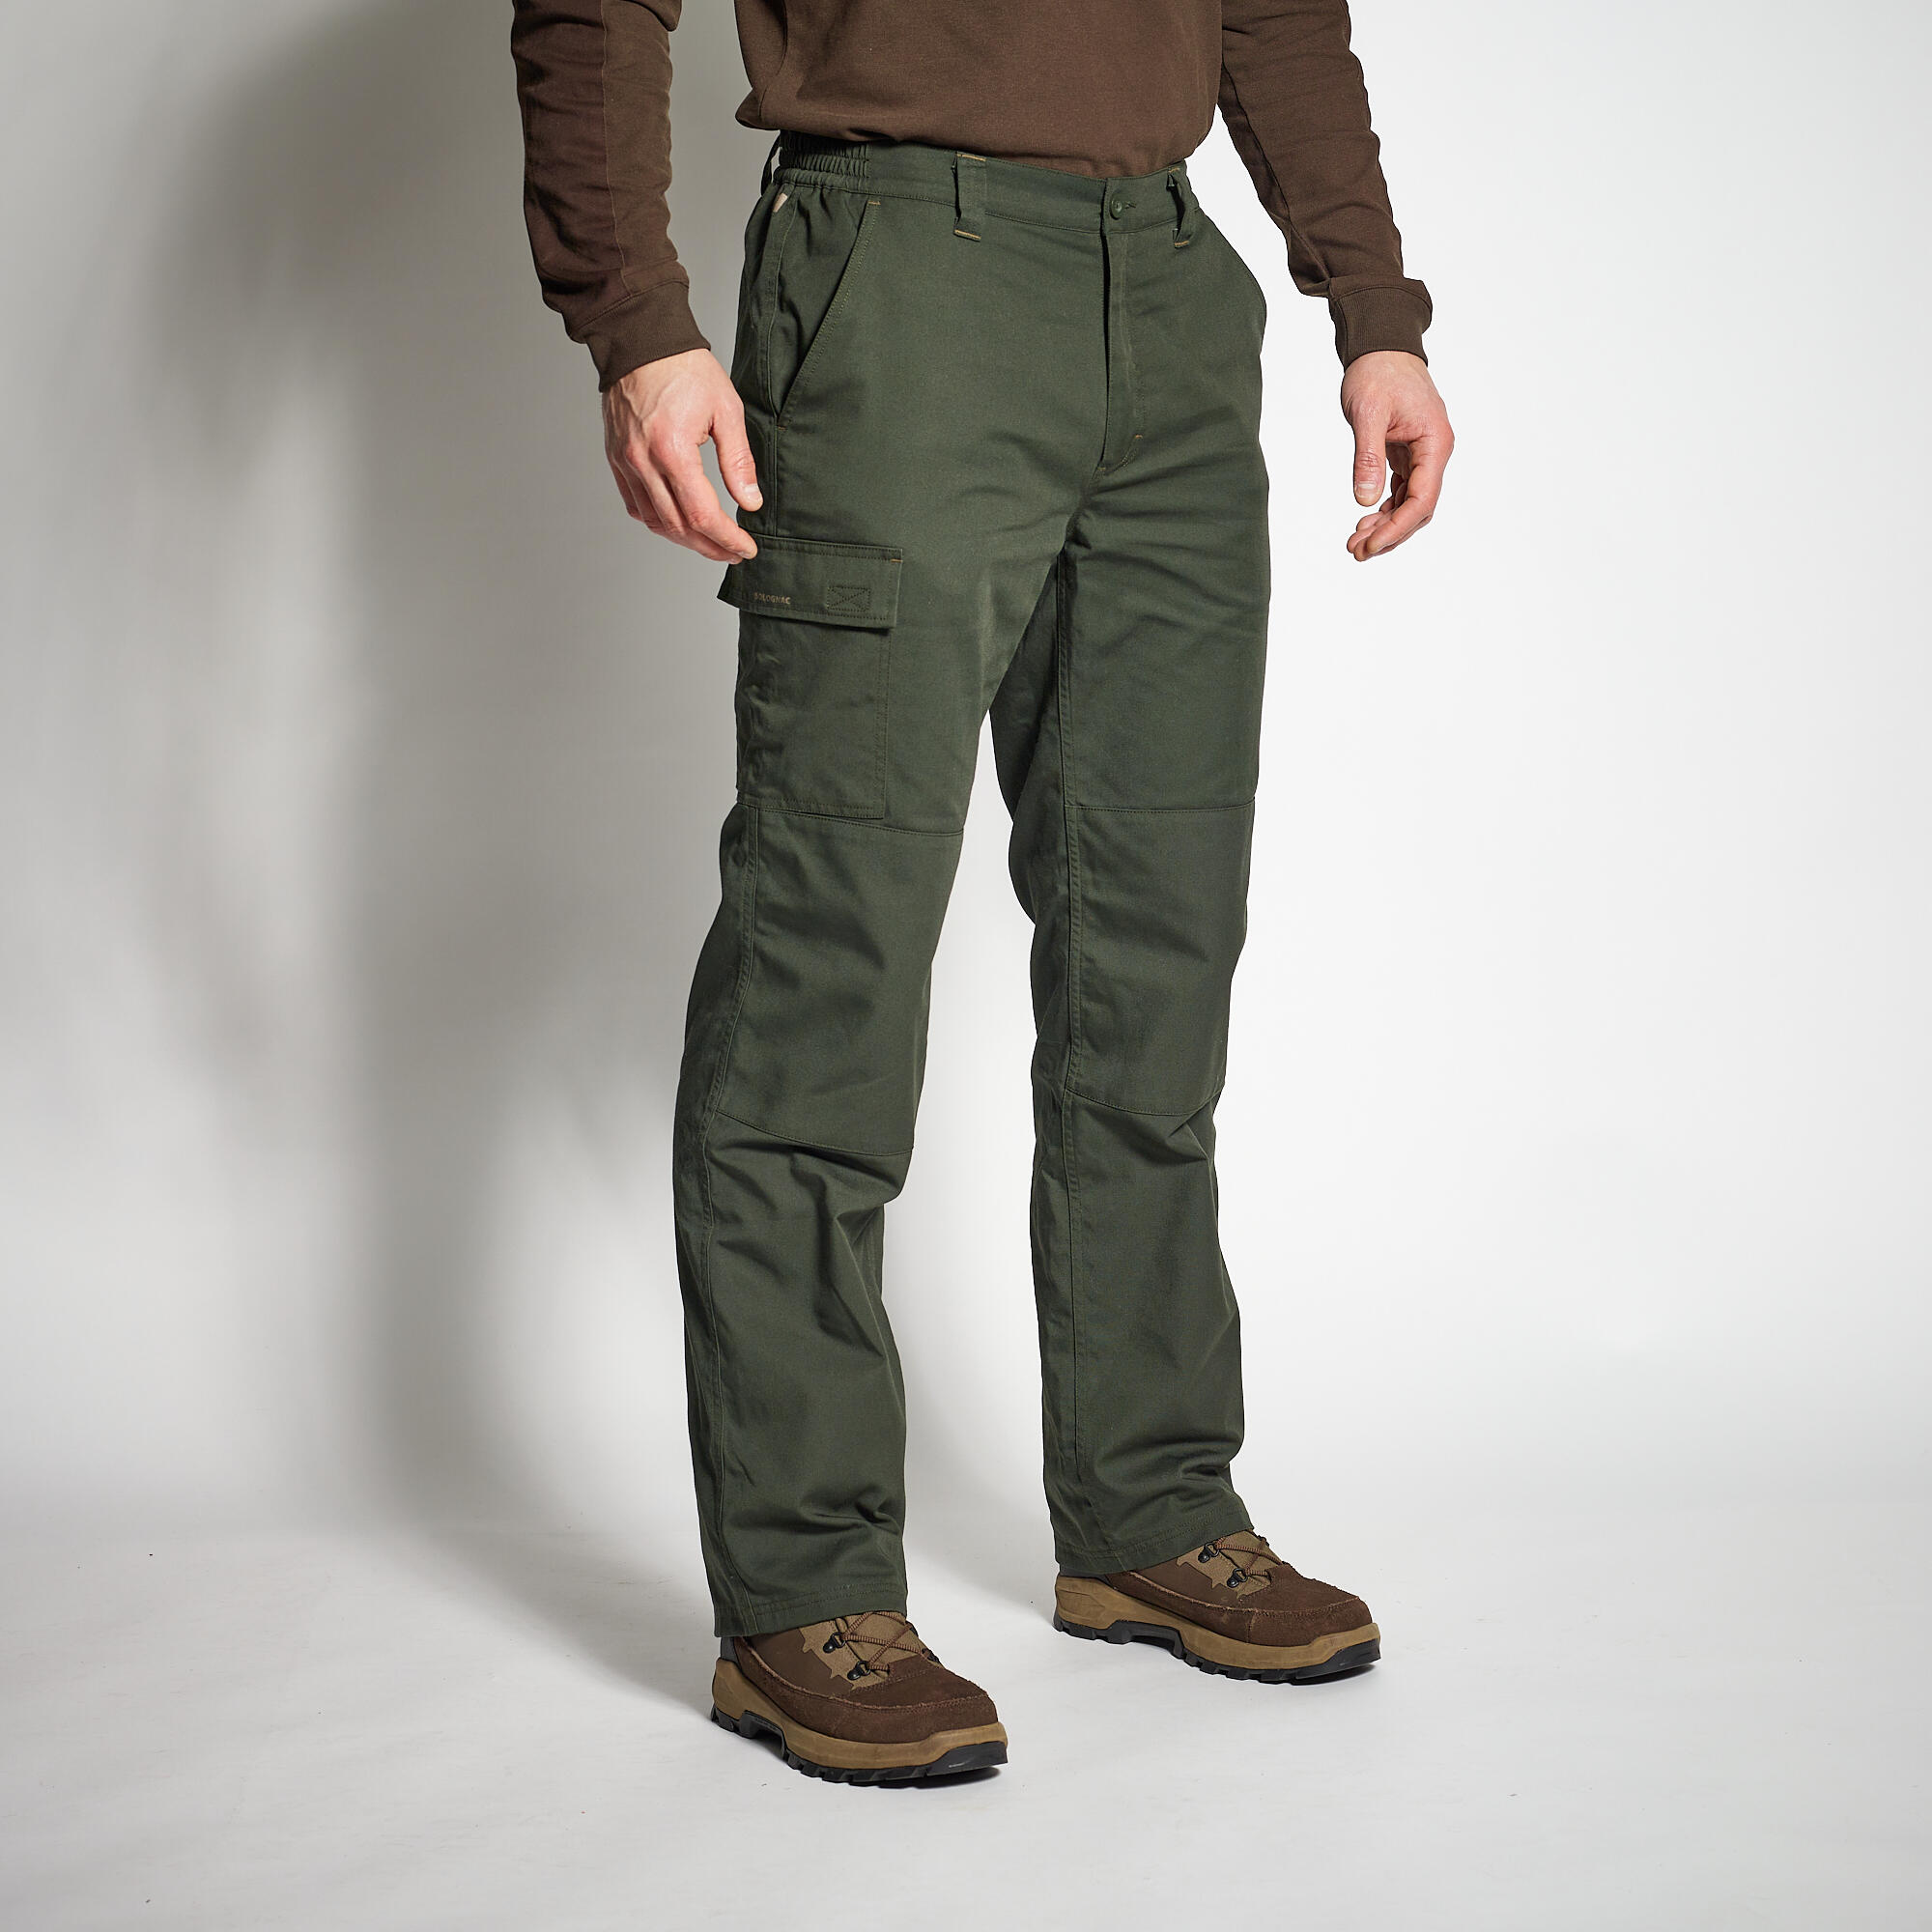 SOLOGNAC WARM HUNTING TROUSERS 100 - GREEN